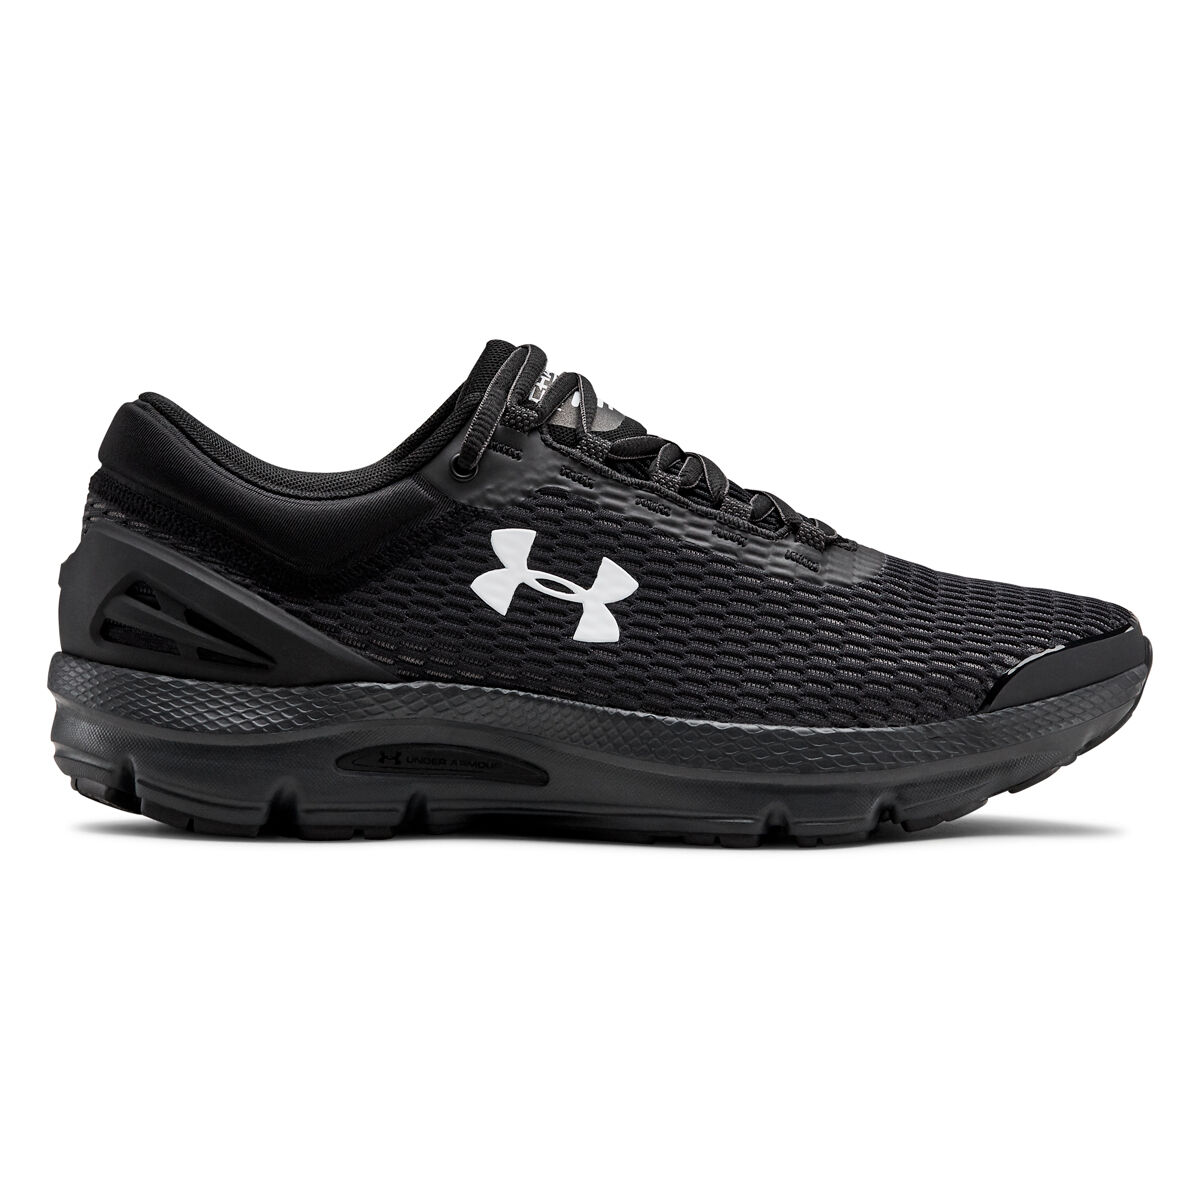 under armour charged intake 3 men's running shoes